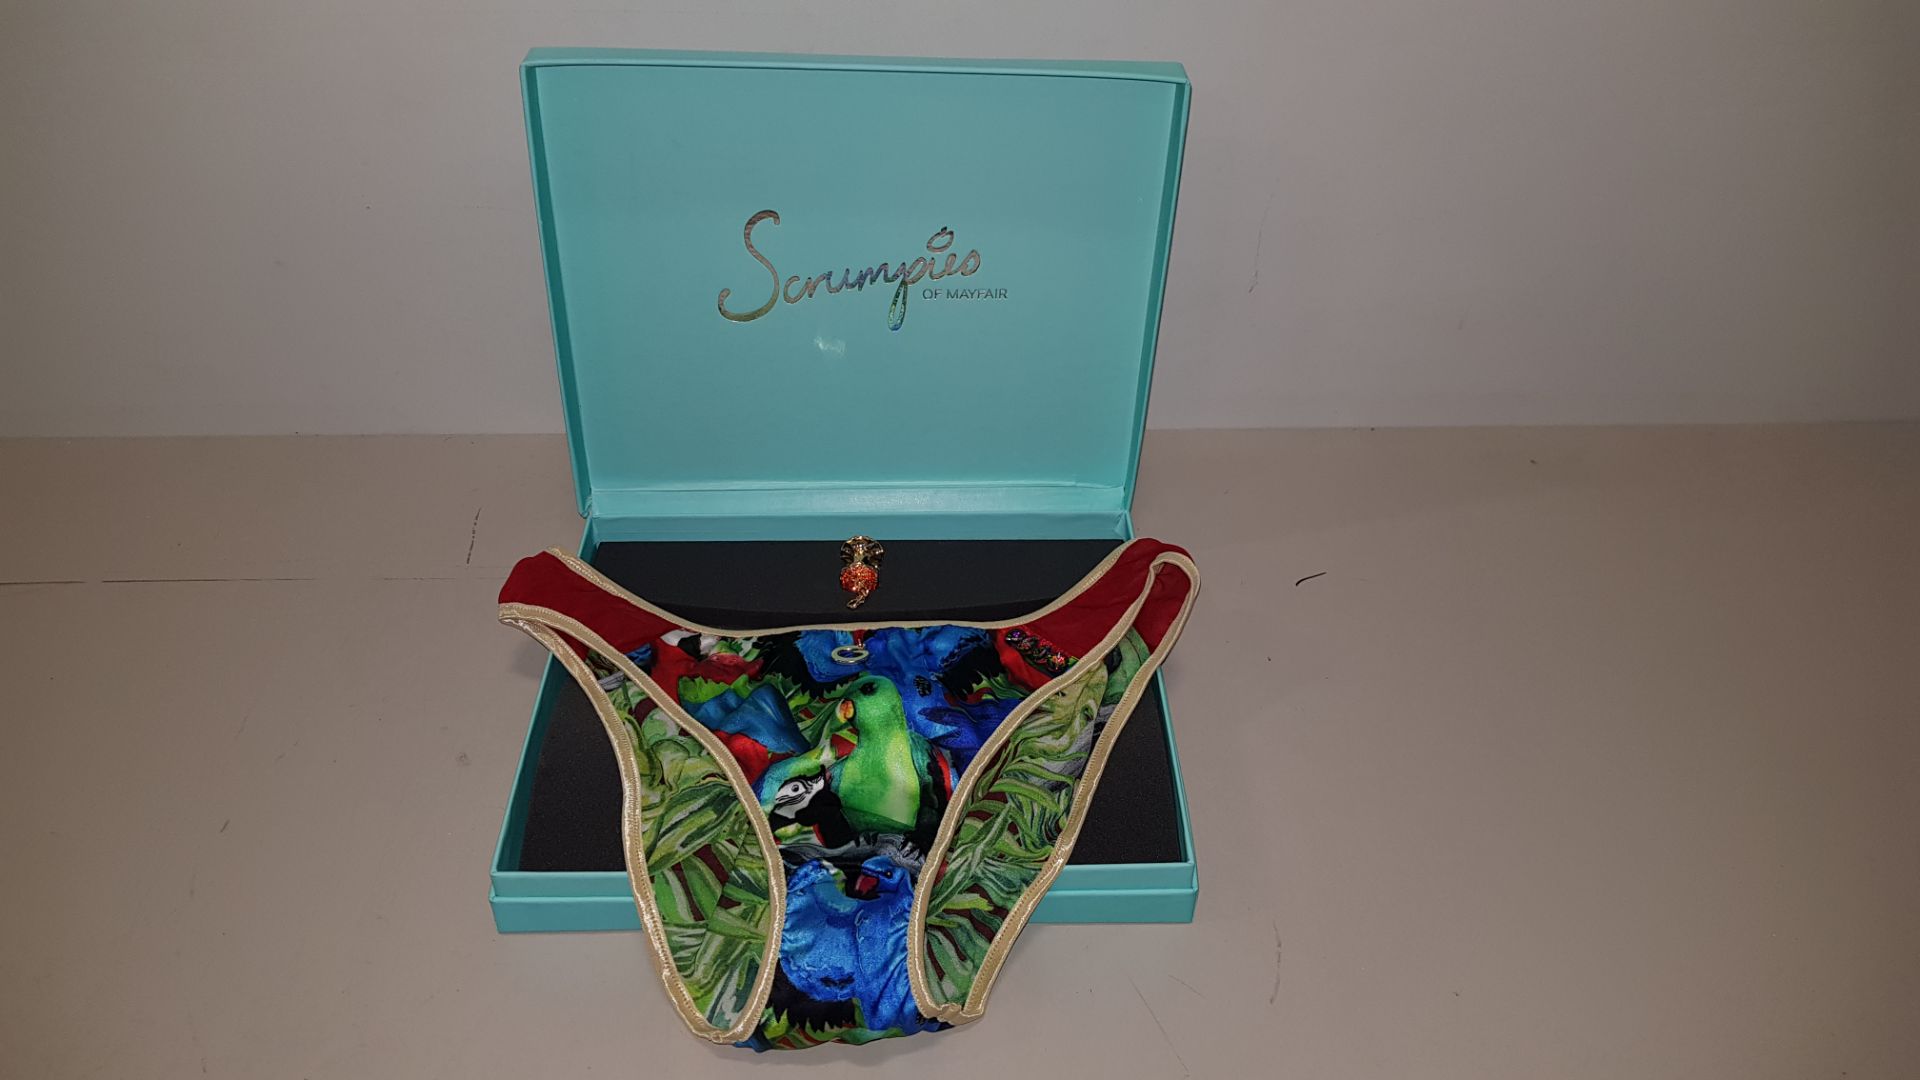 50 X SCRUMPIES OF MAYFAIR GALA TROPICAL BIKINI STYLE BRIEFS - SIZE 12 (3)) - WITH BAG OF 50 CHARMS